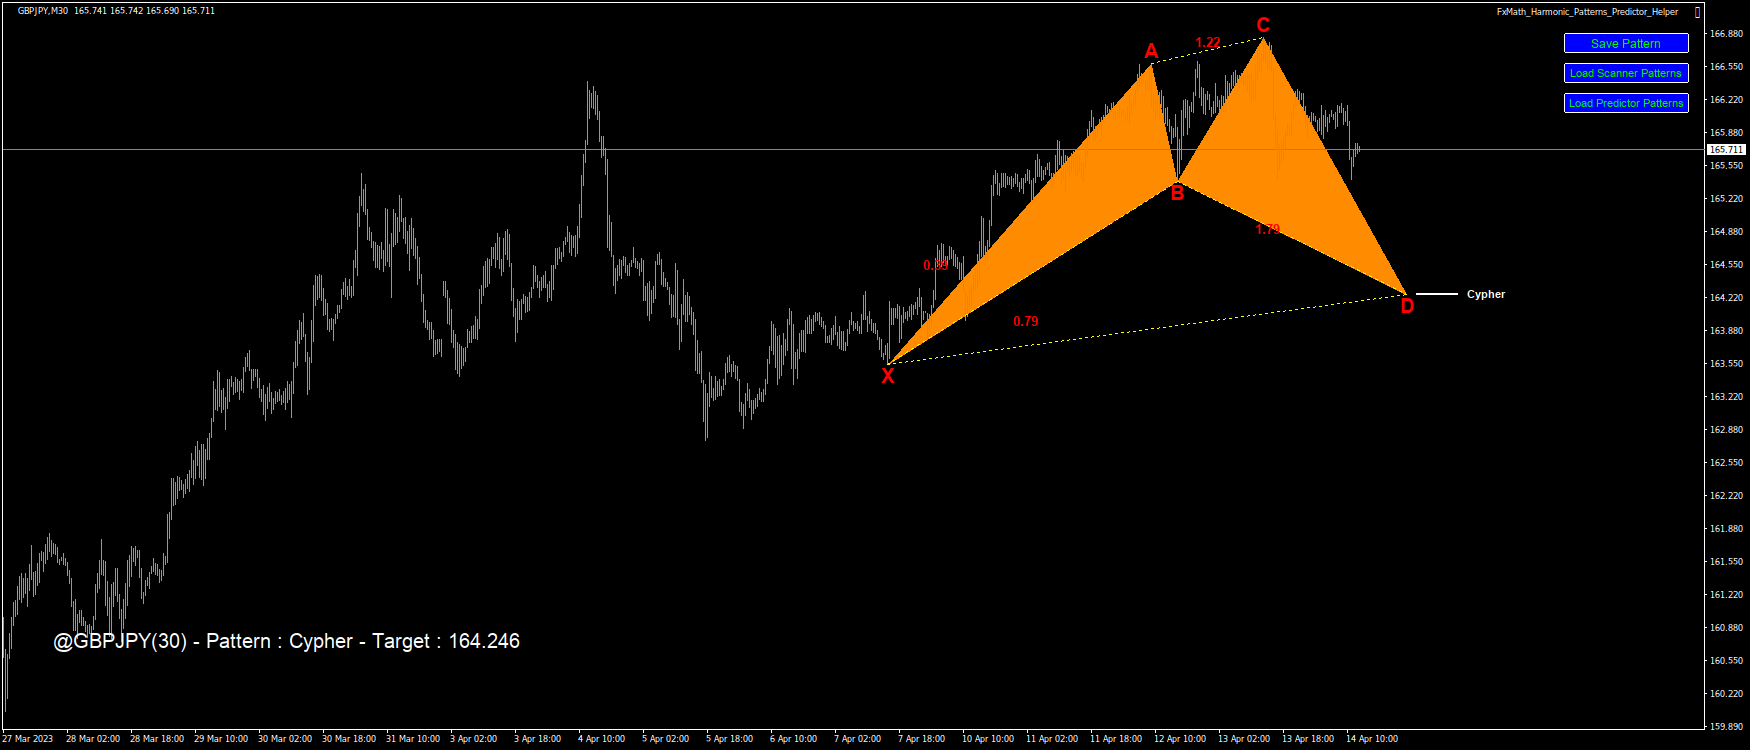 @GBPJPY(30) – Pattern : Cypher – Target : 164.246-2023.04.14 13:01